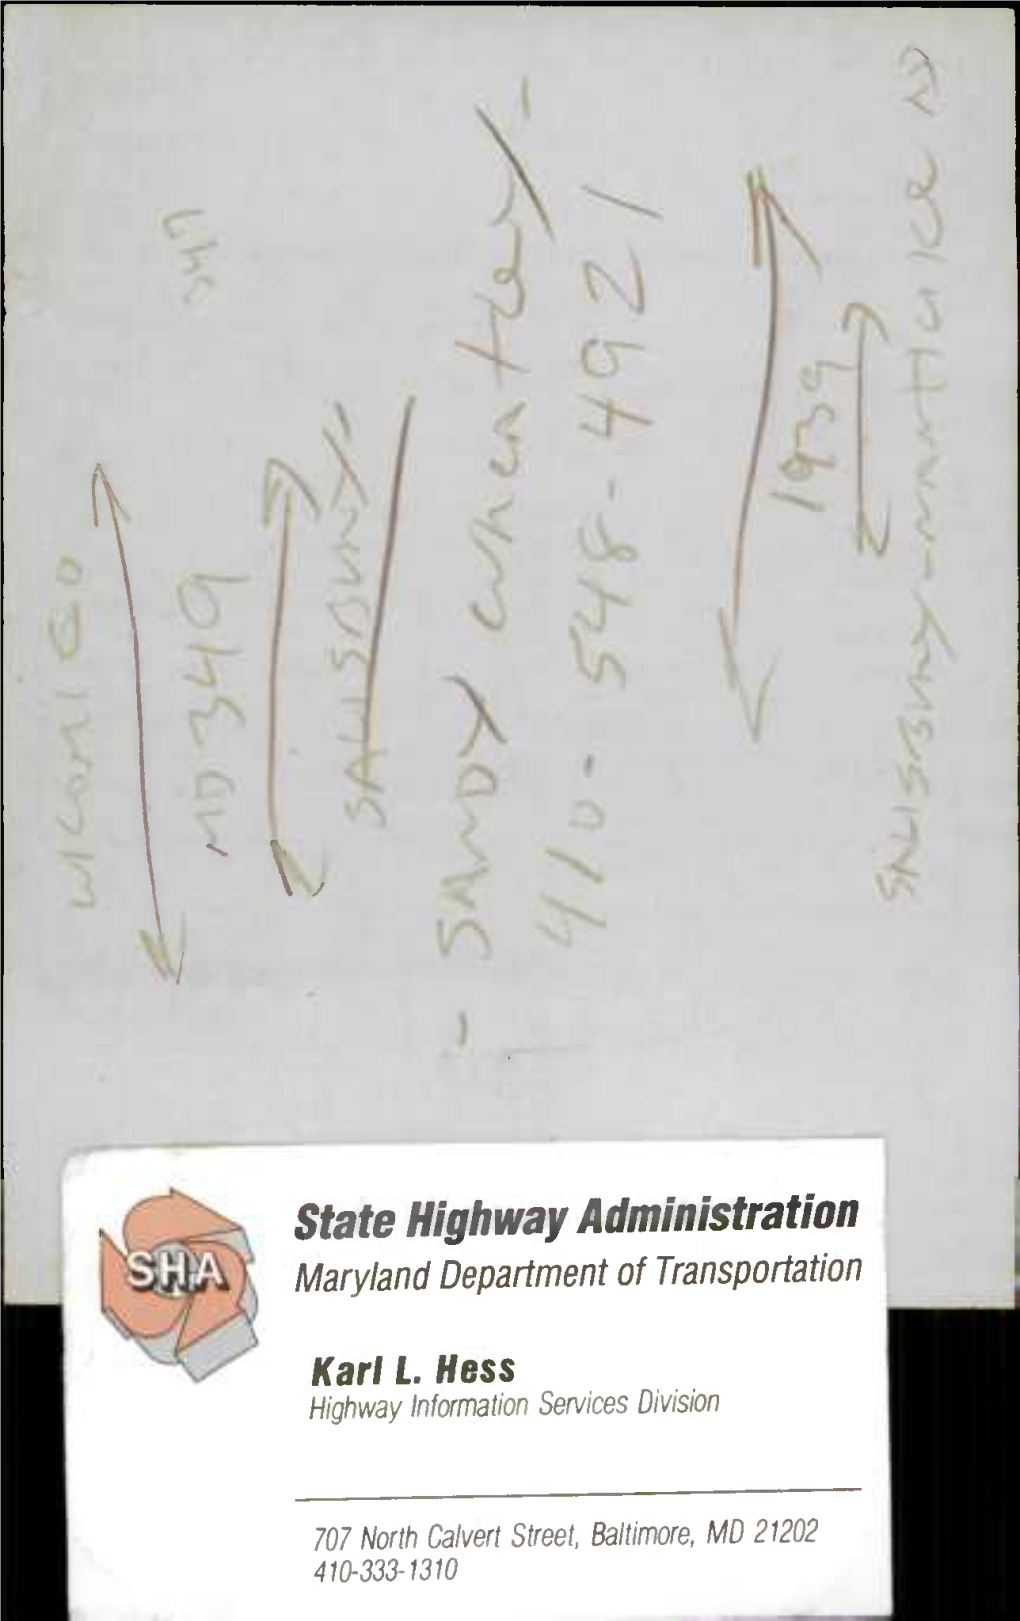 State Highway Administration Maryland Department of Transportation